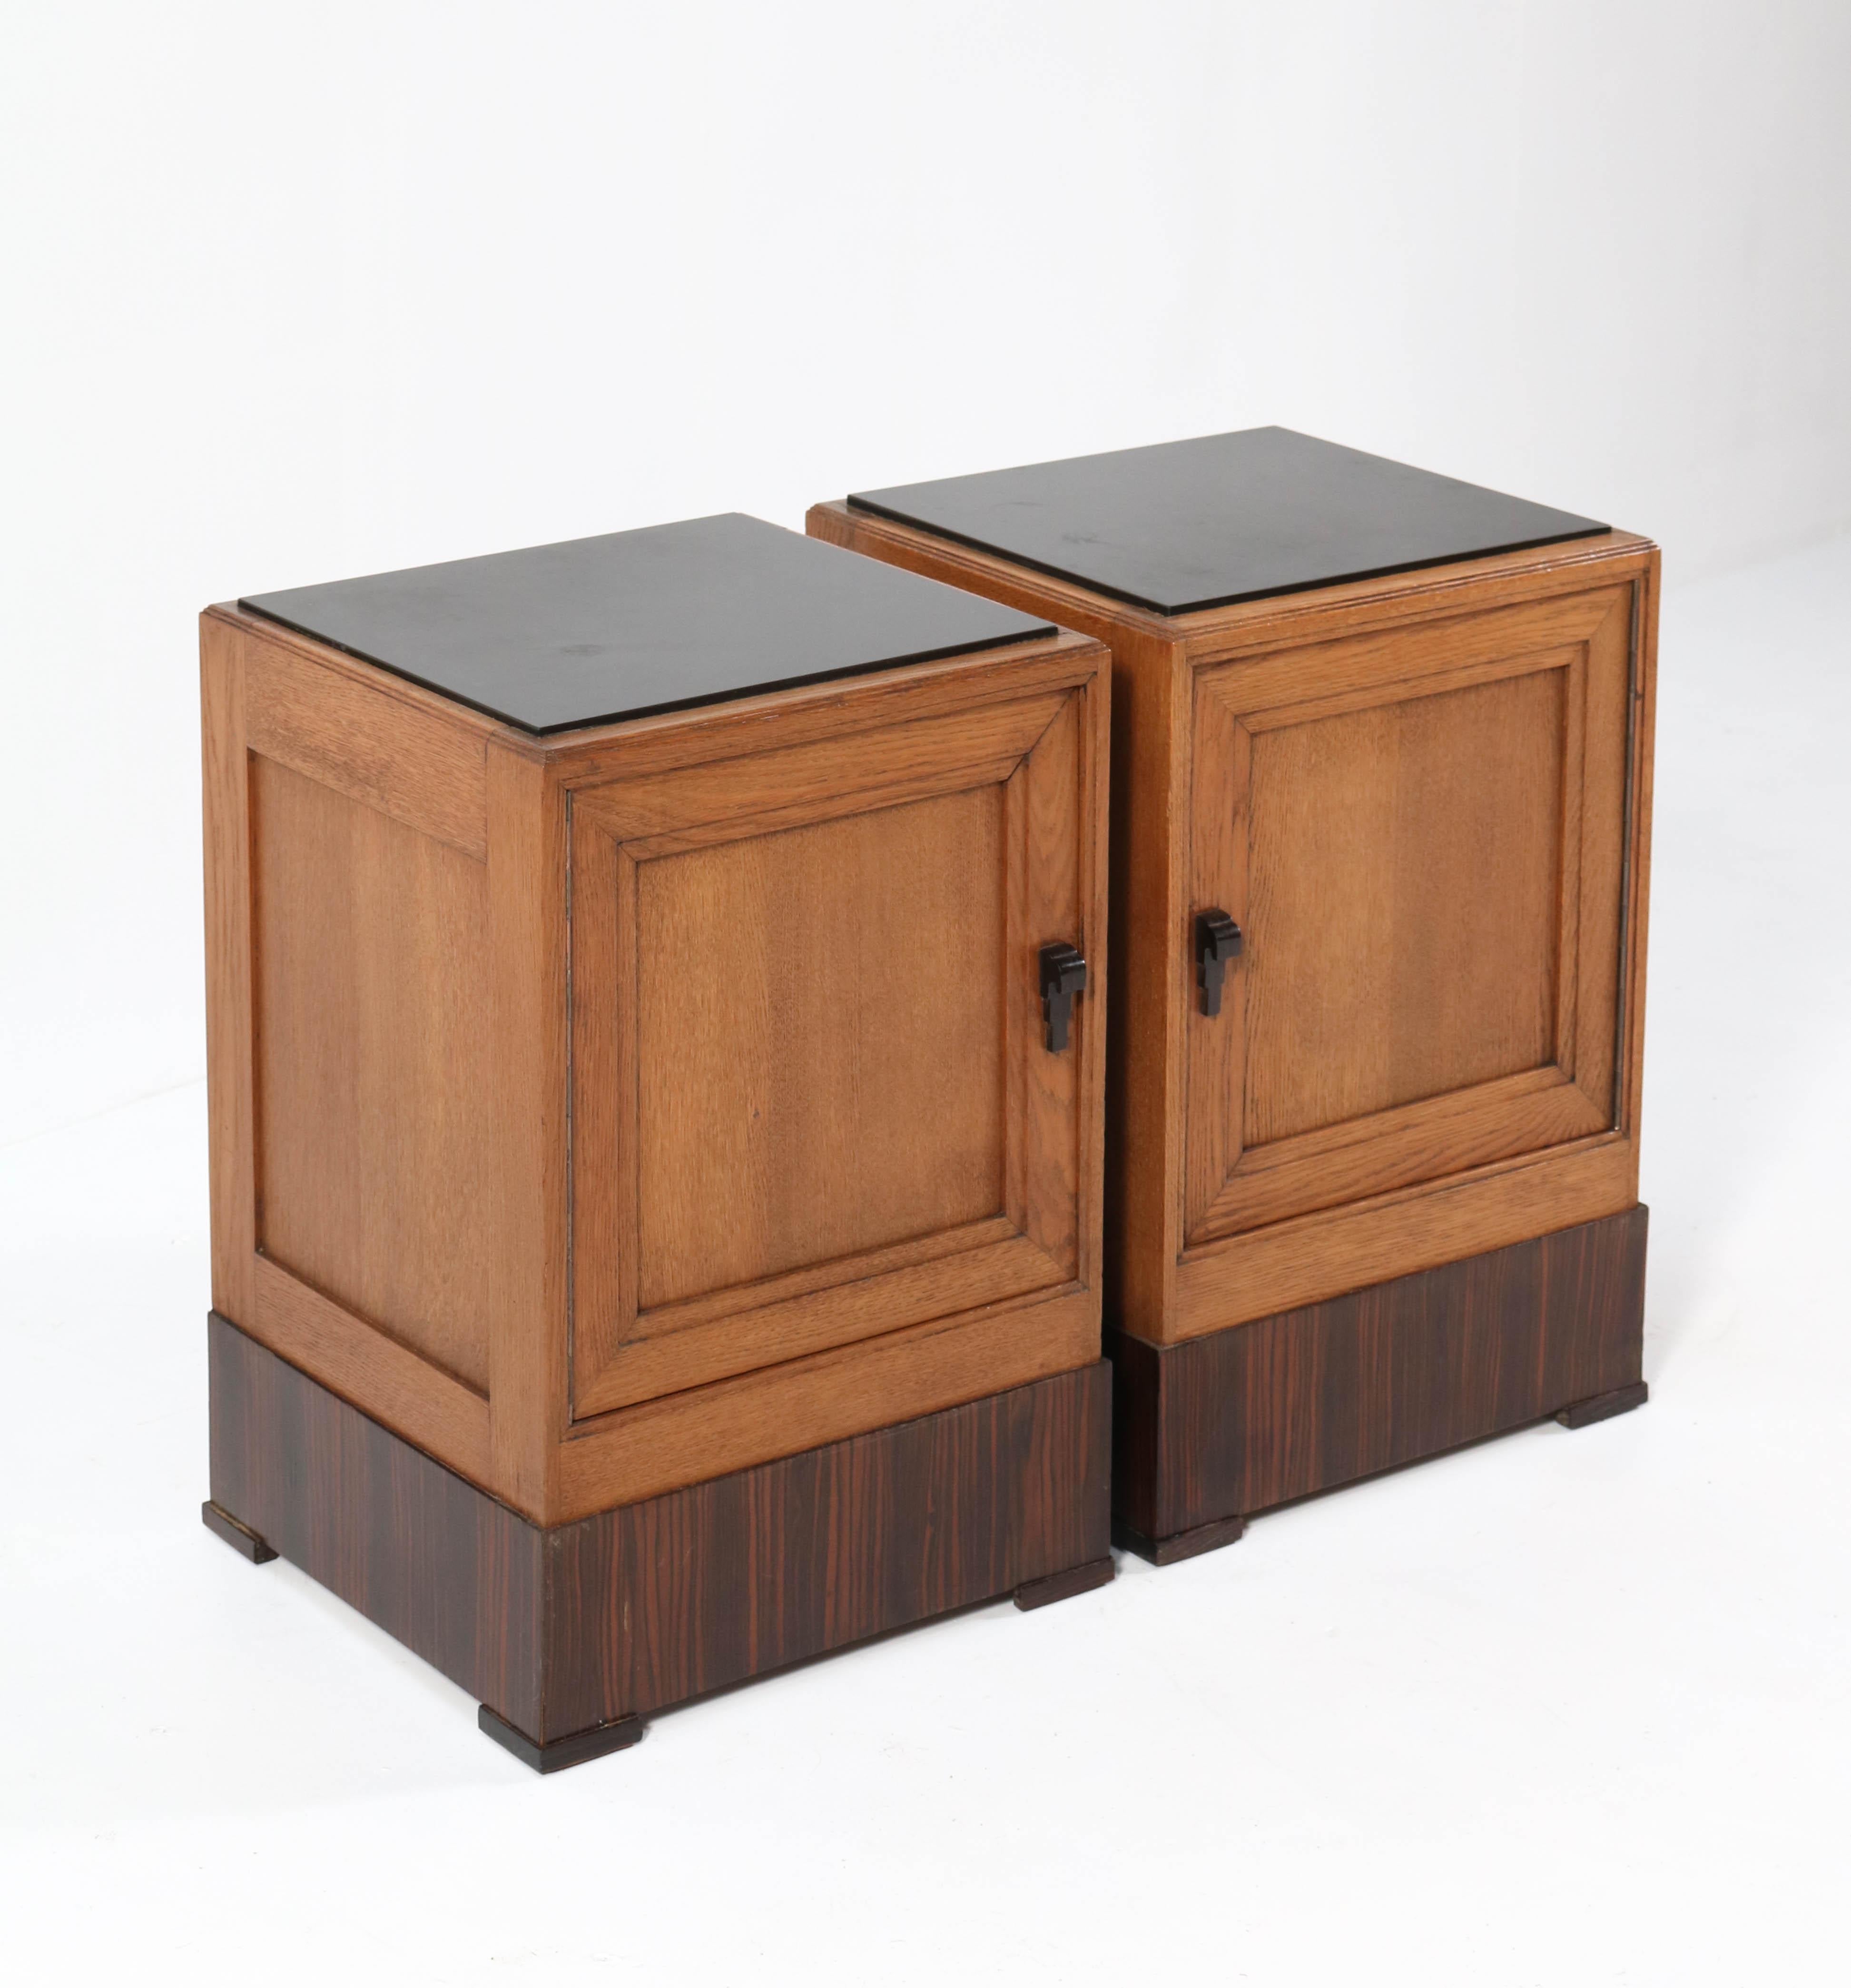 Magnificent and rare pair of Art Deco Haagse School nightstands or bedside tables.
Striking Dutch design from the 1920s.
Solid oak with solid Macassar ebony handles.
Original black granite tops.
This pair of high quality is in very good